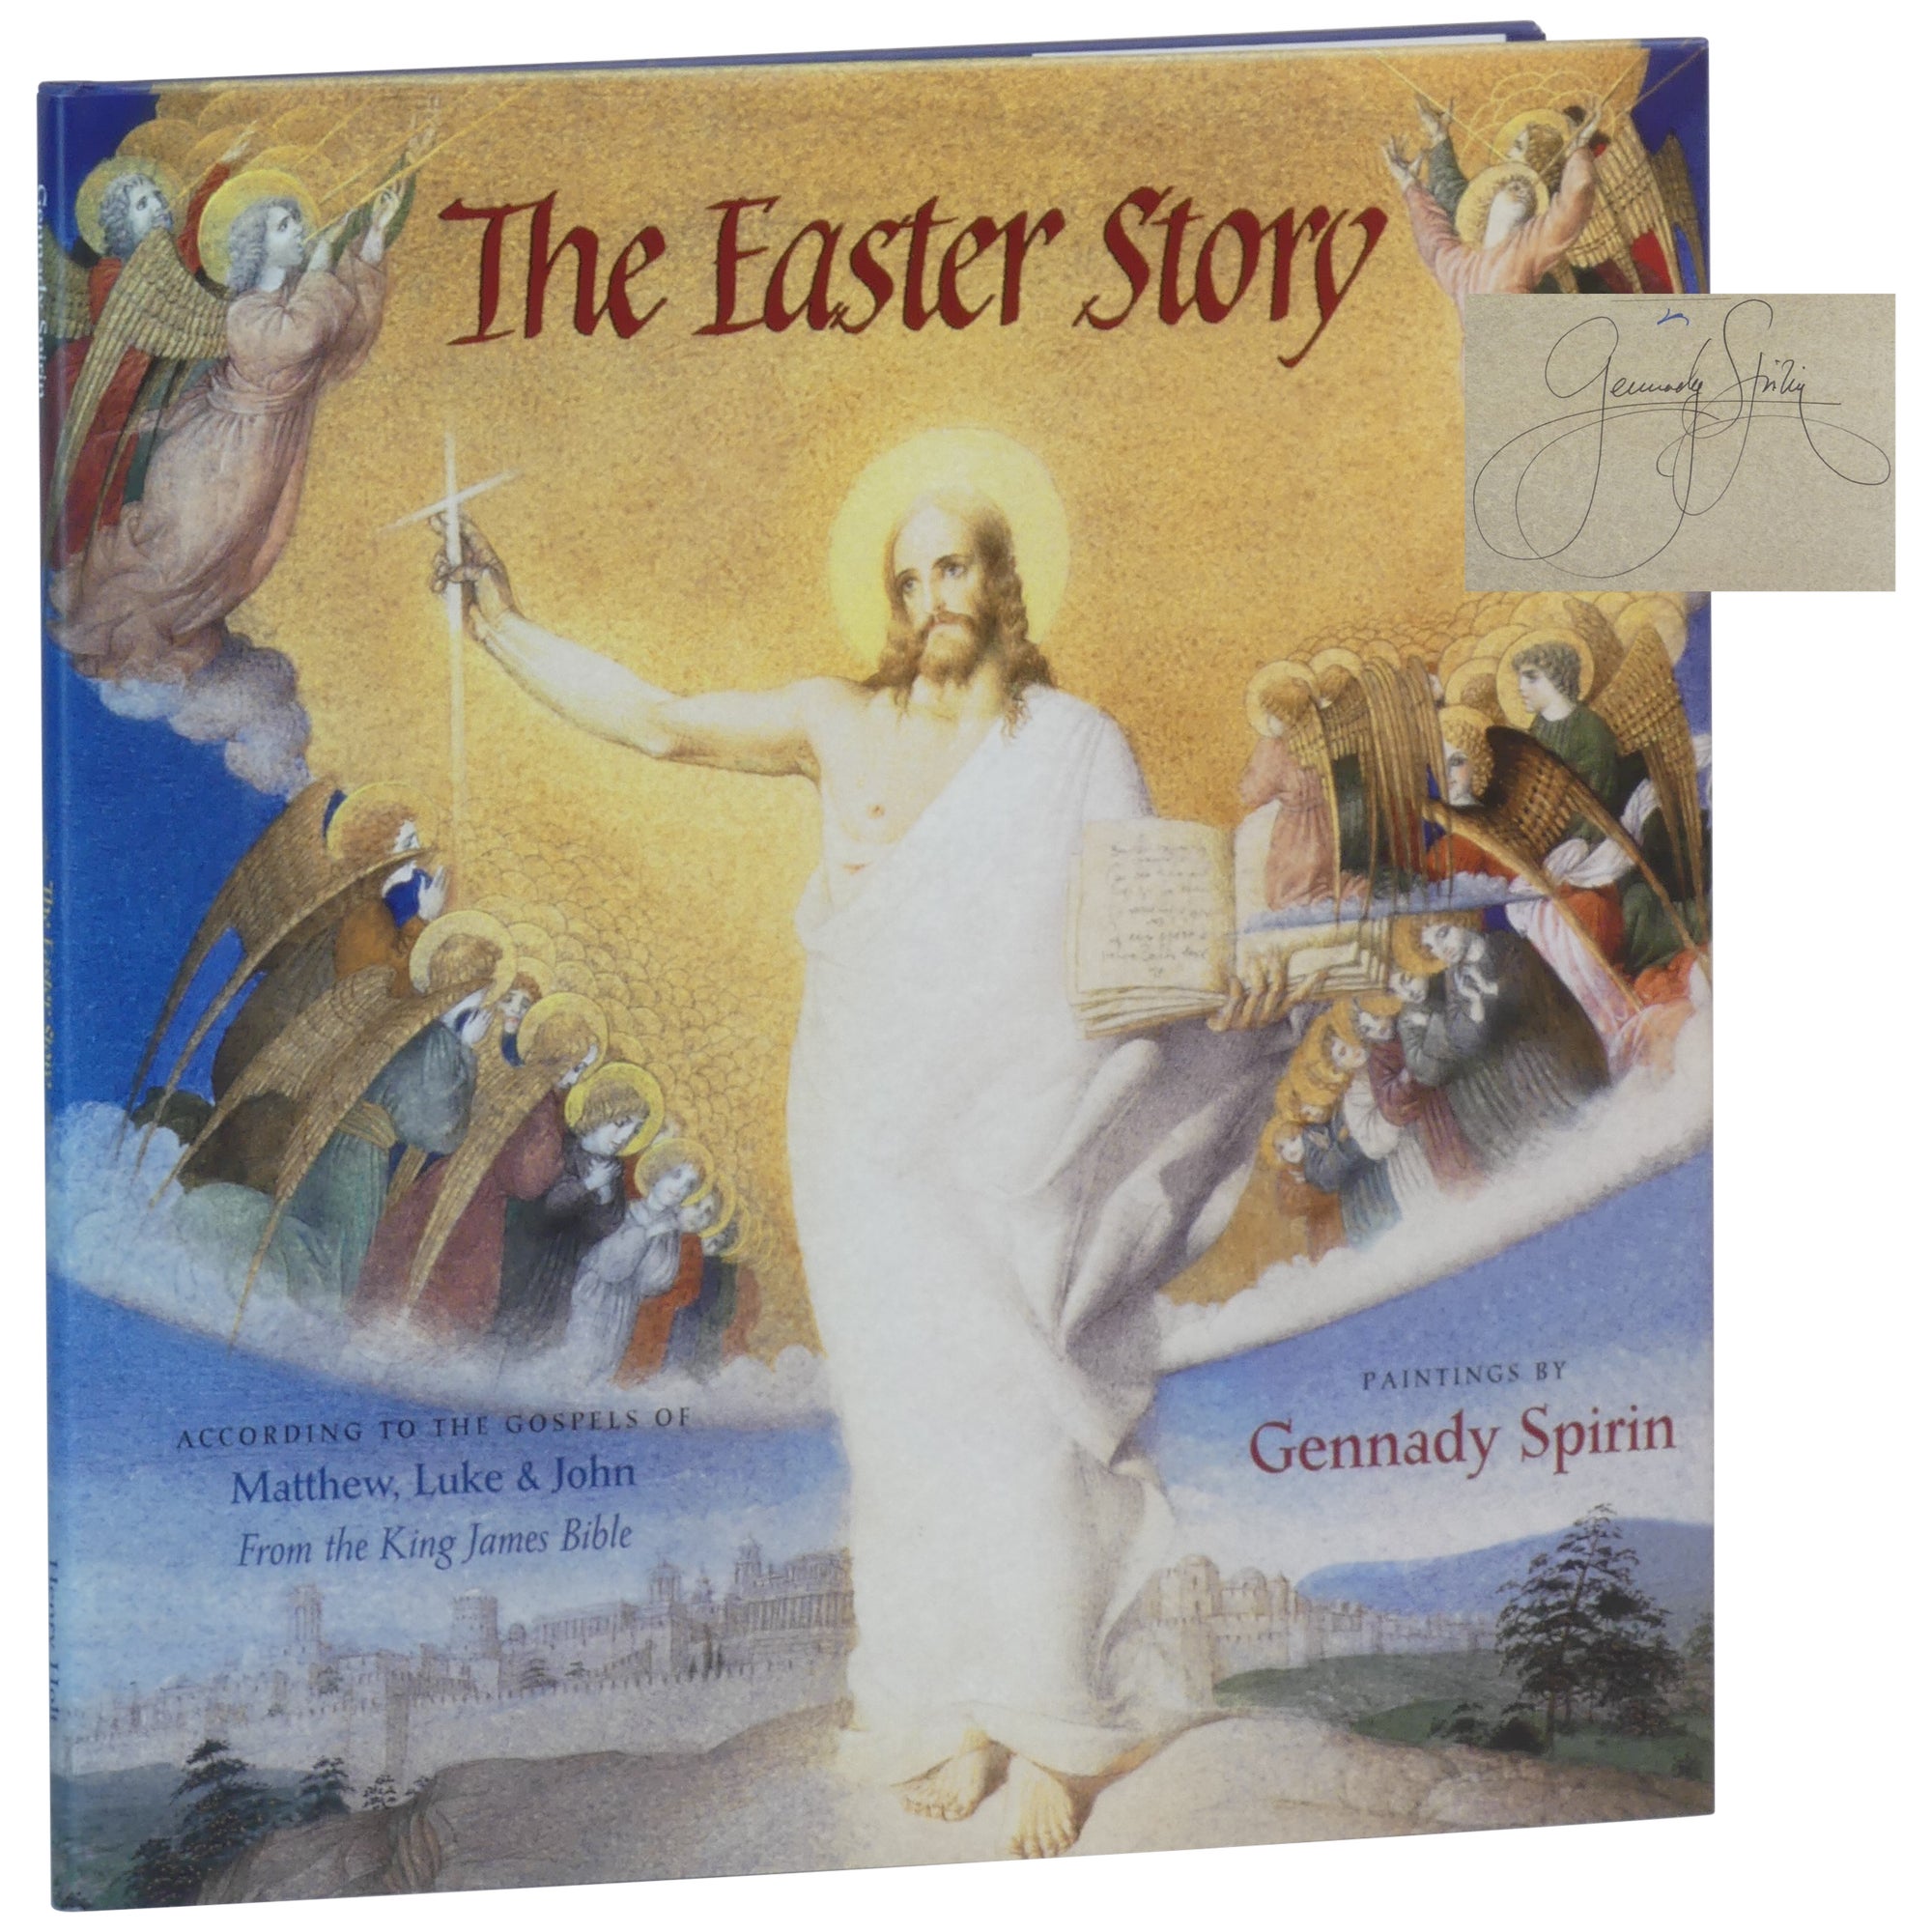 The Easter Story According to the Gospels of Matthew, Luke & John from the King James Bible